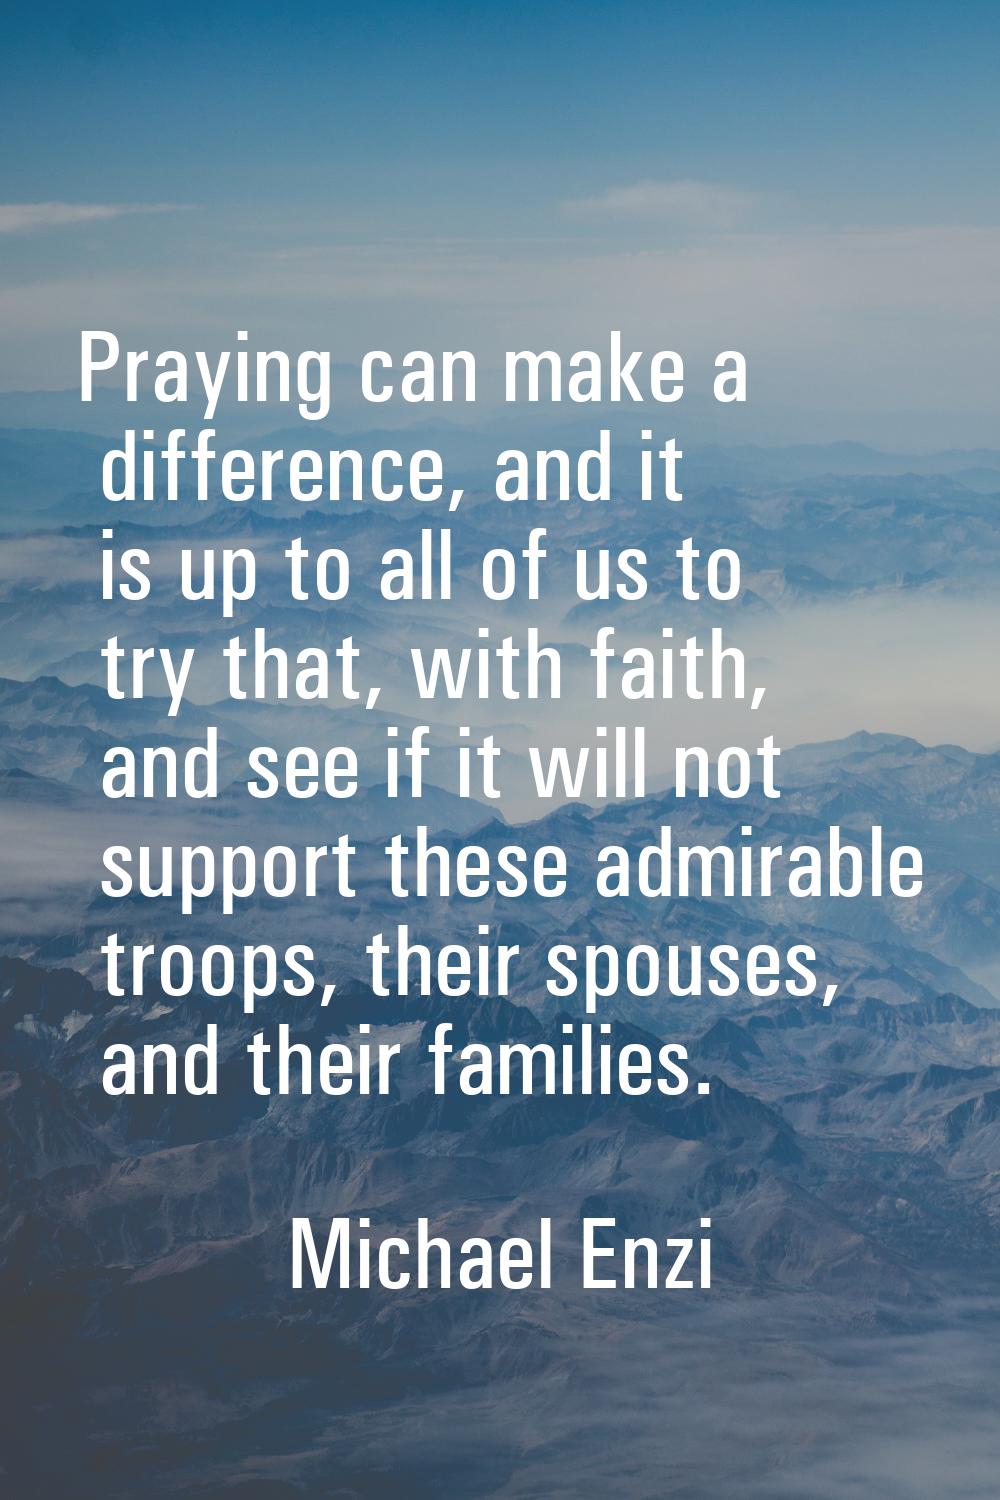 Praying can make a difference, and it is up to all of us to try that, with faith, and see if it wil